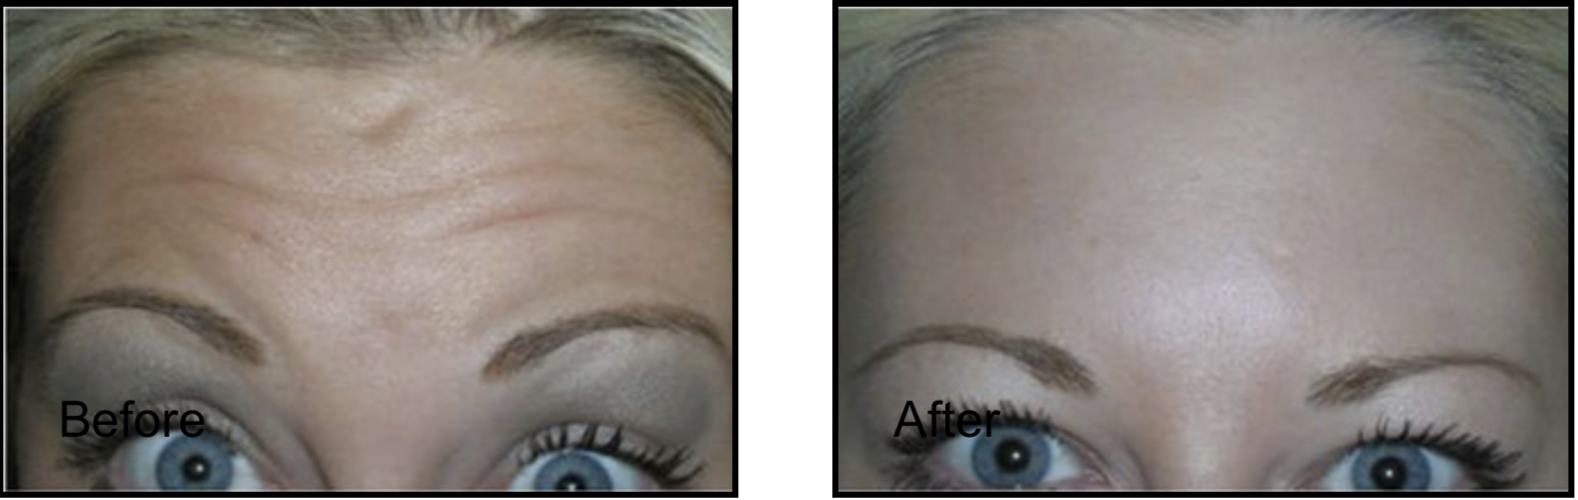 Patient's forehead before and after Botox for wrinkle treatment